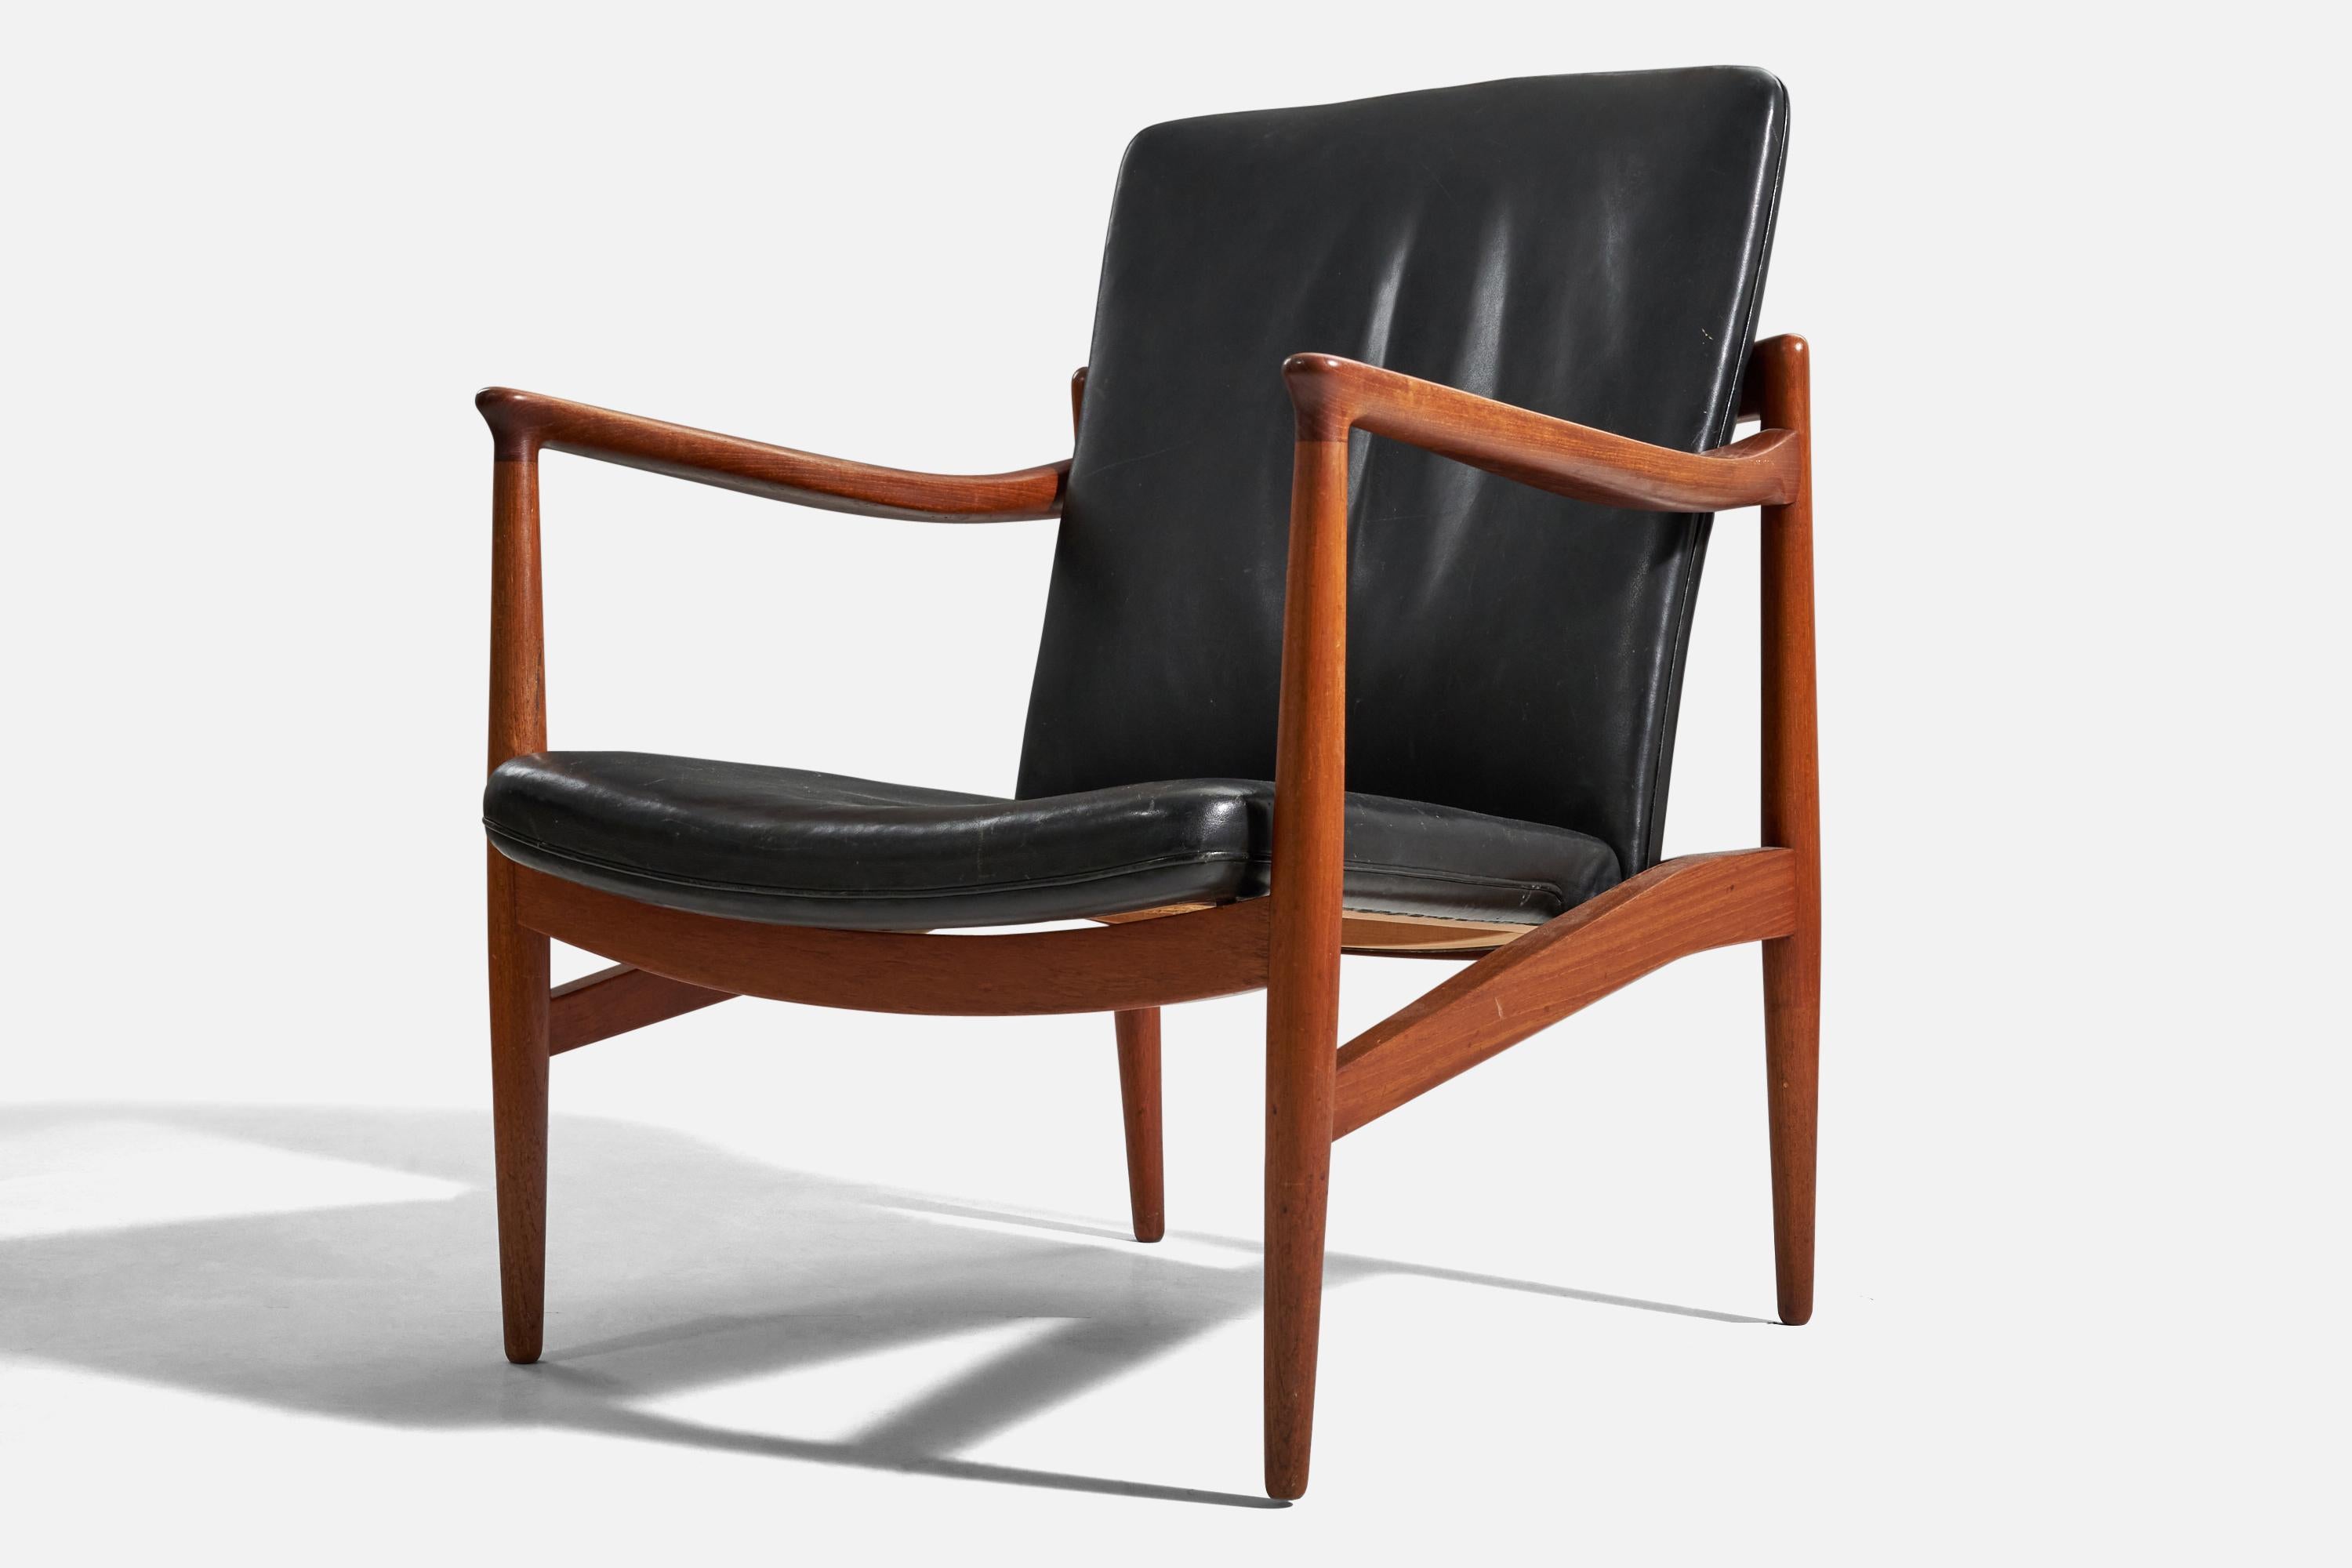 Jacob Kjaer, Lounge Chairs, Teak, Black Leather, Denmark, 1945 In Good Condition For Sale In High Point, NC